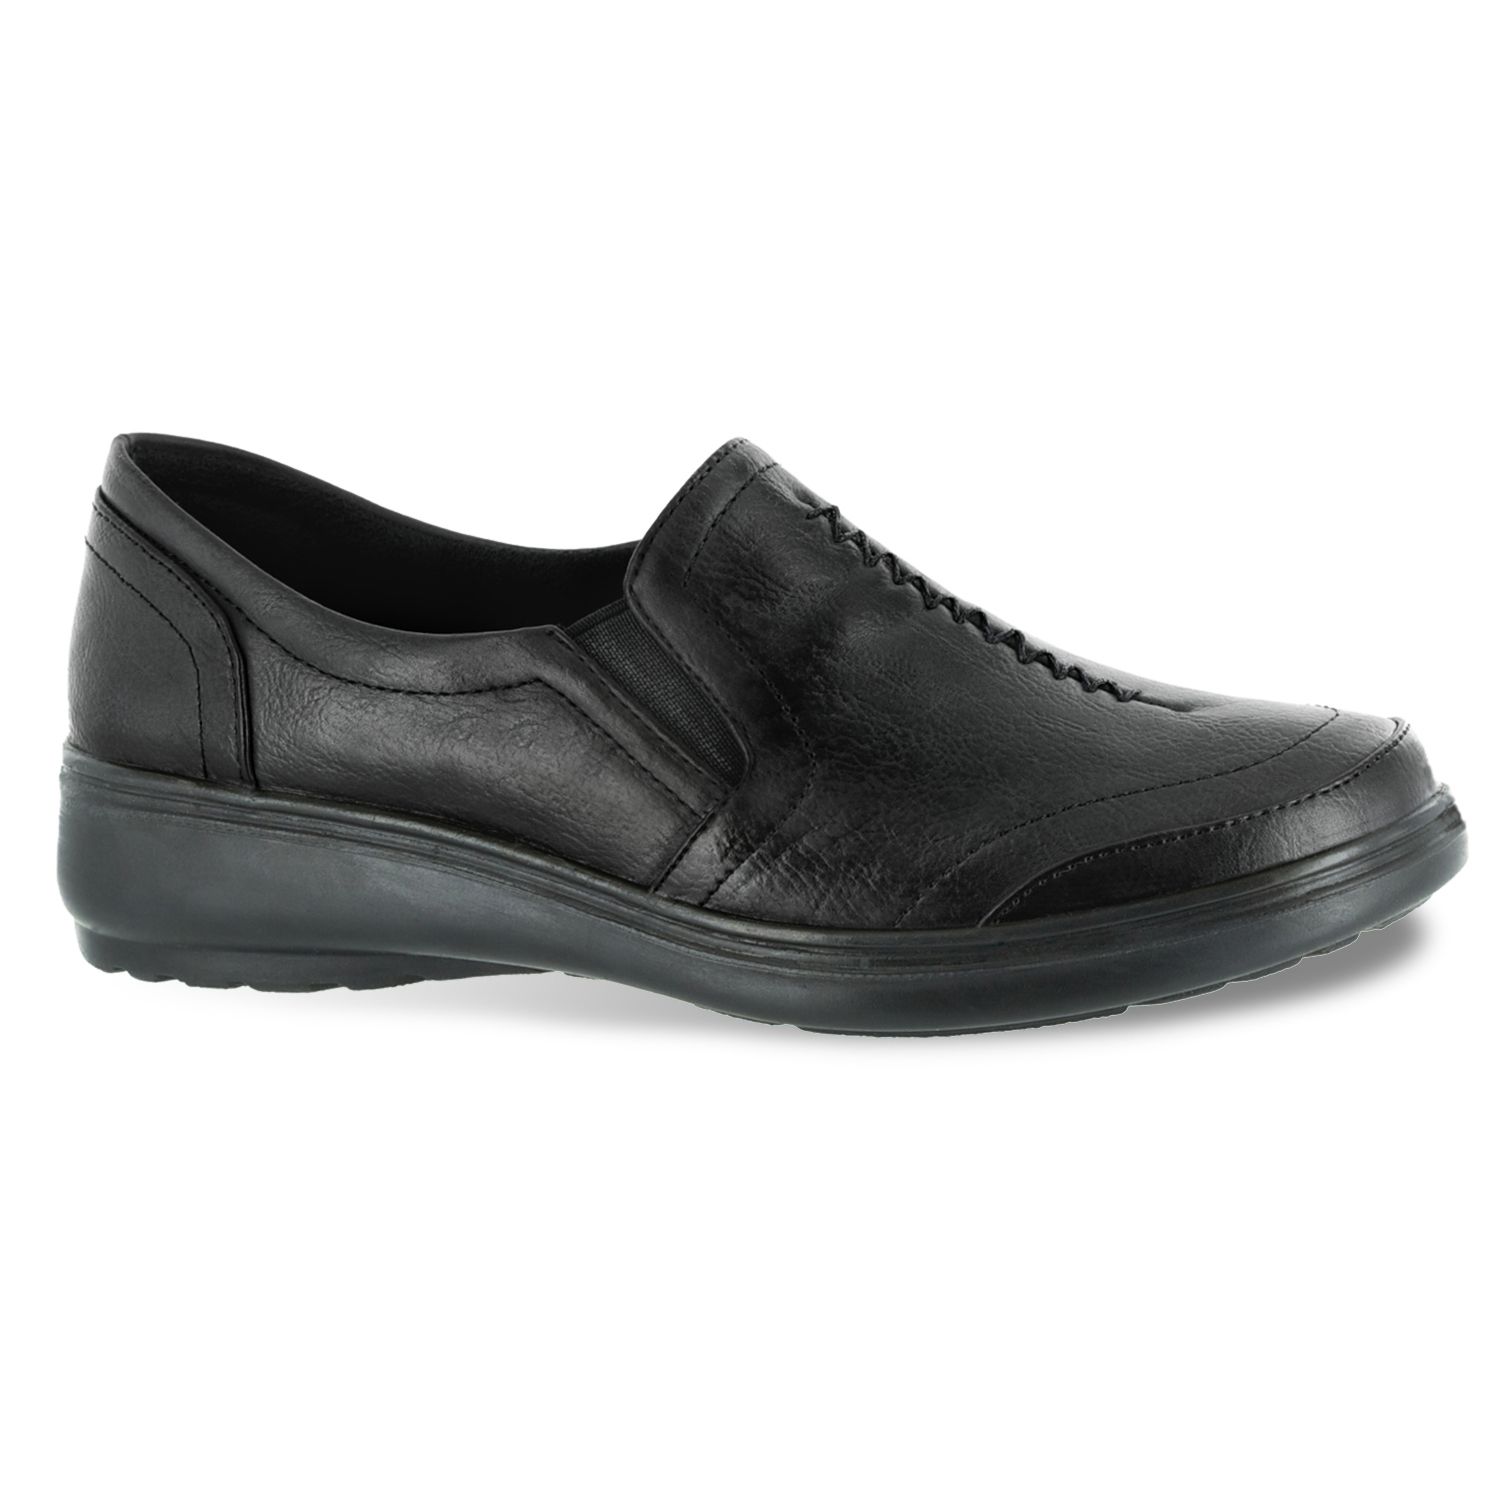 Image for Durango Easy Street Ultimate Comfort Women's Loafers at Kohl's.